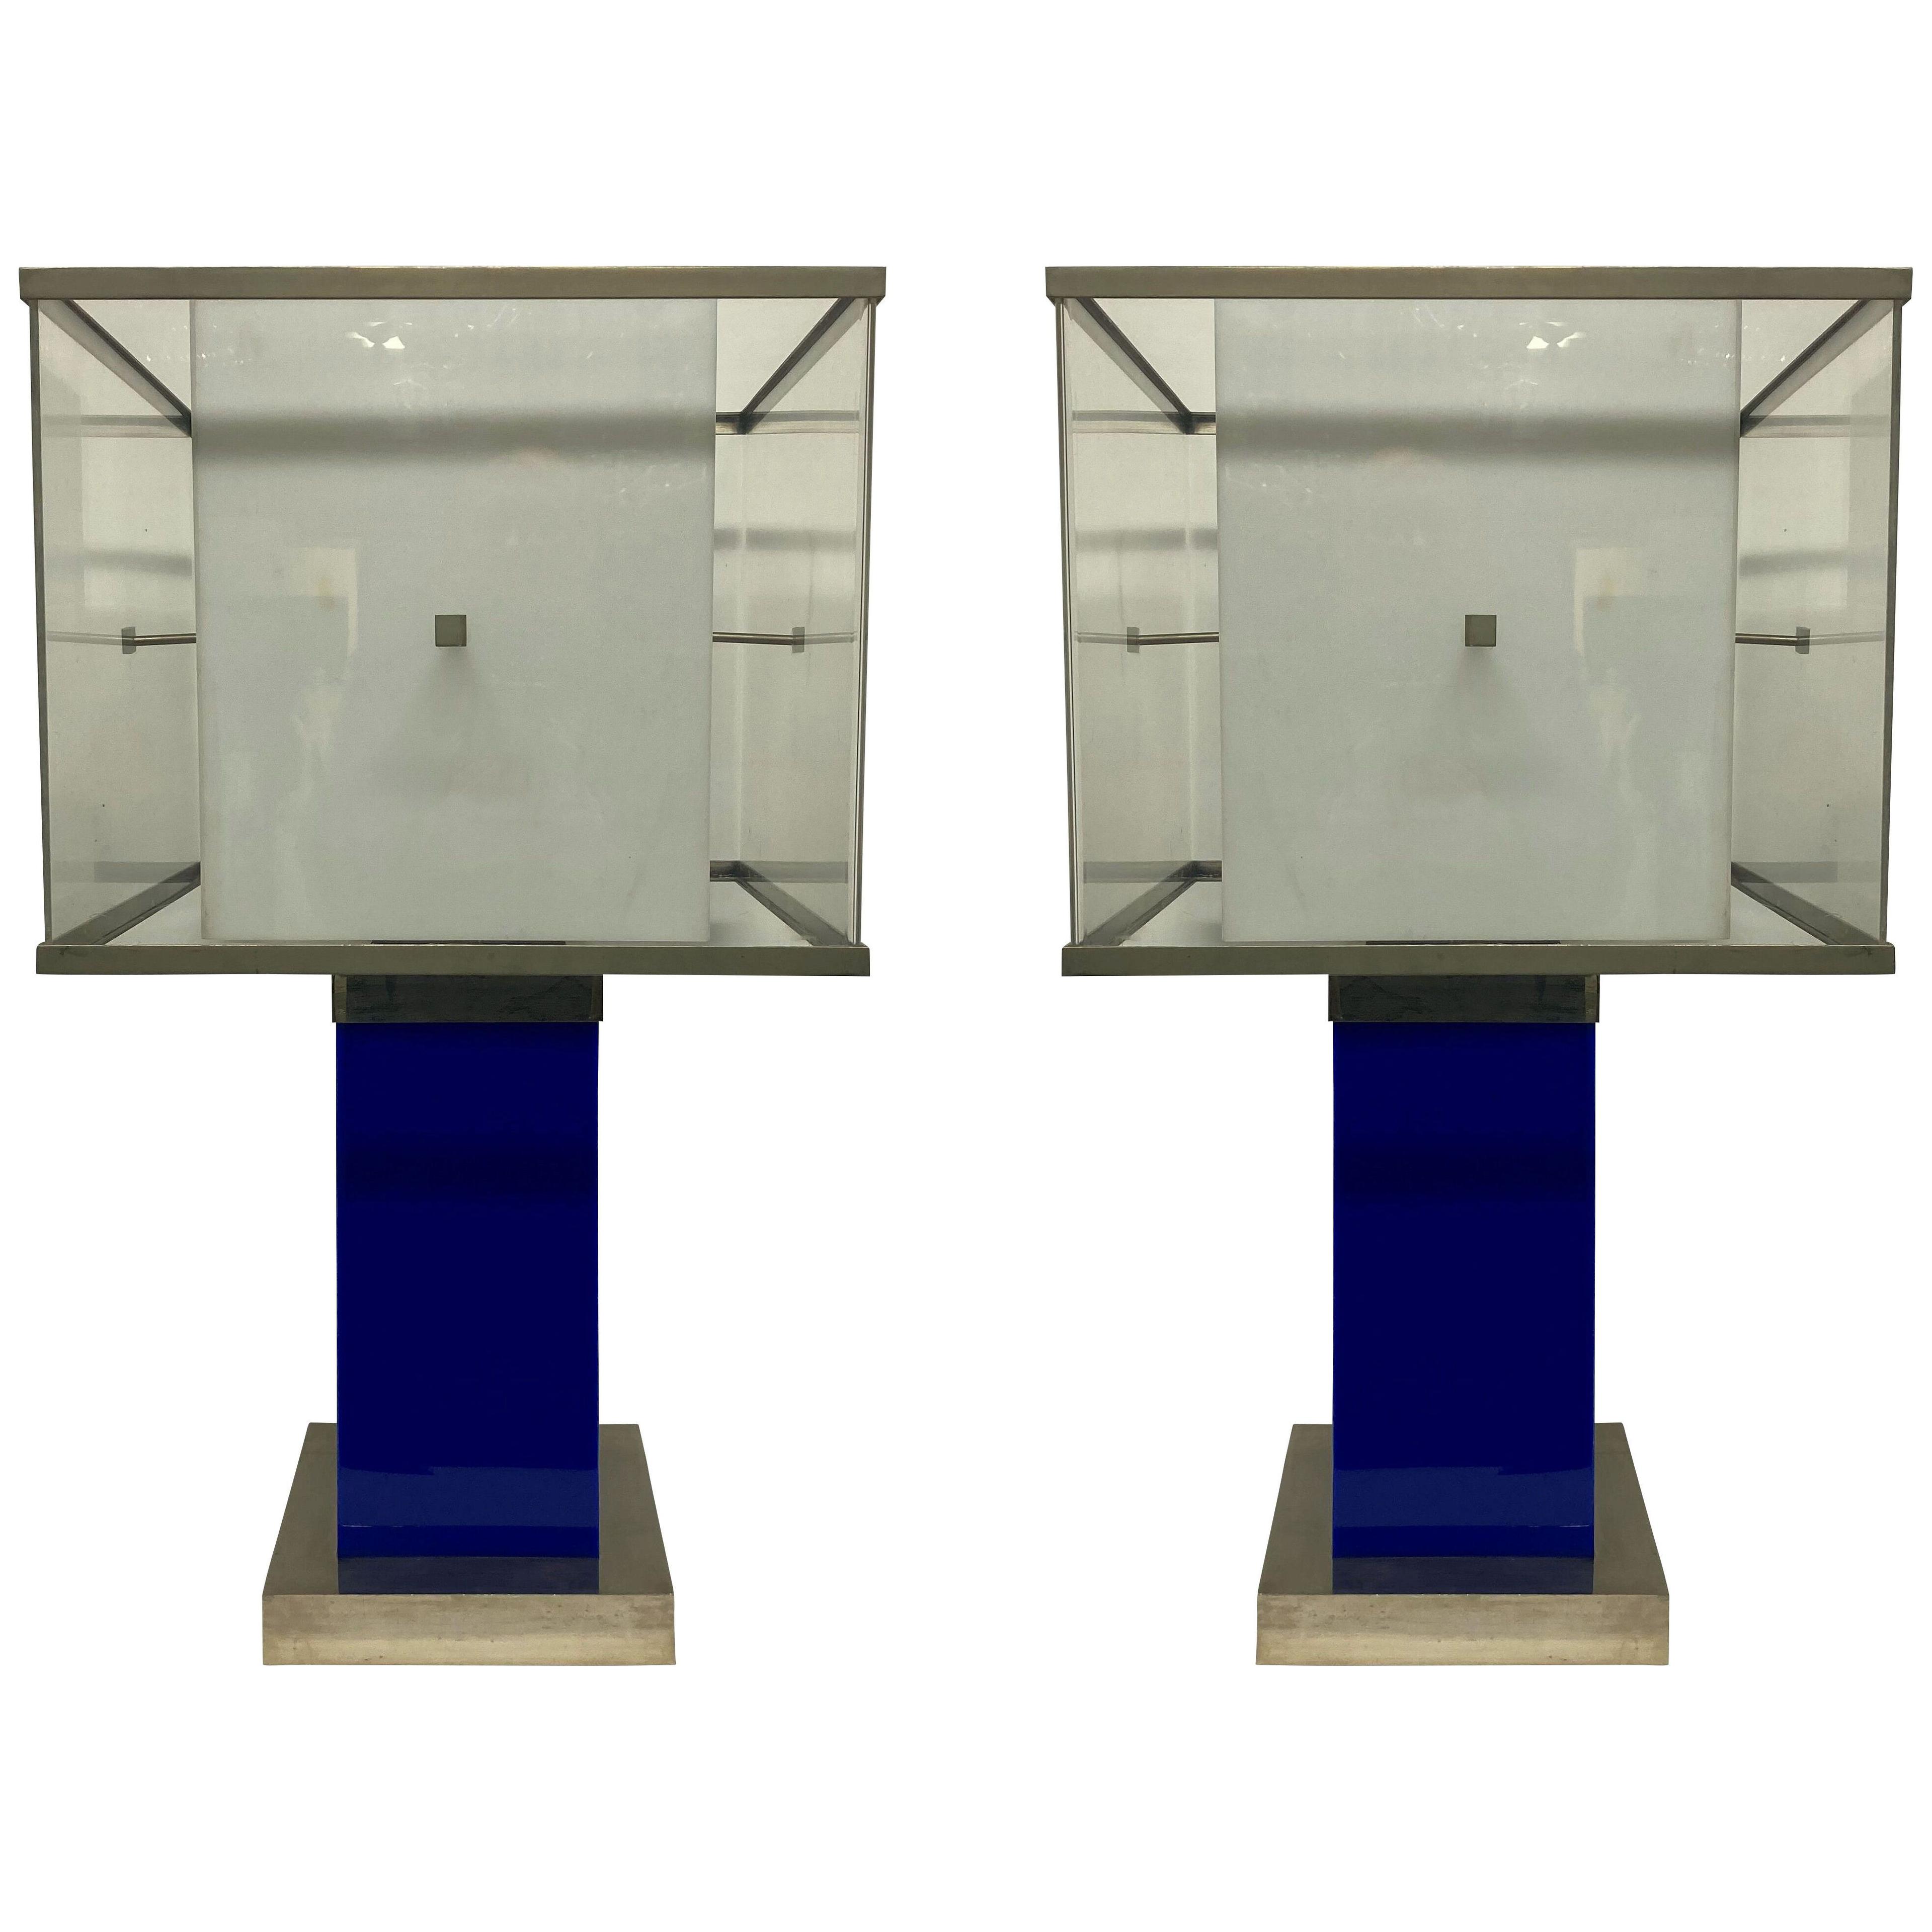 A PAIR OF LARGE ITALIAN MID-CENTURY ACRYLIC & CHROME LAMPS IN COBALT BLUE